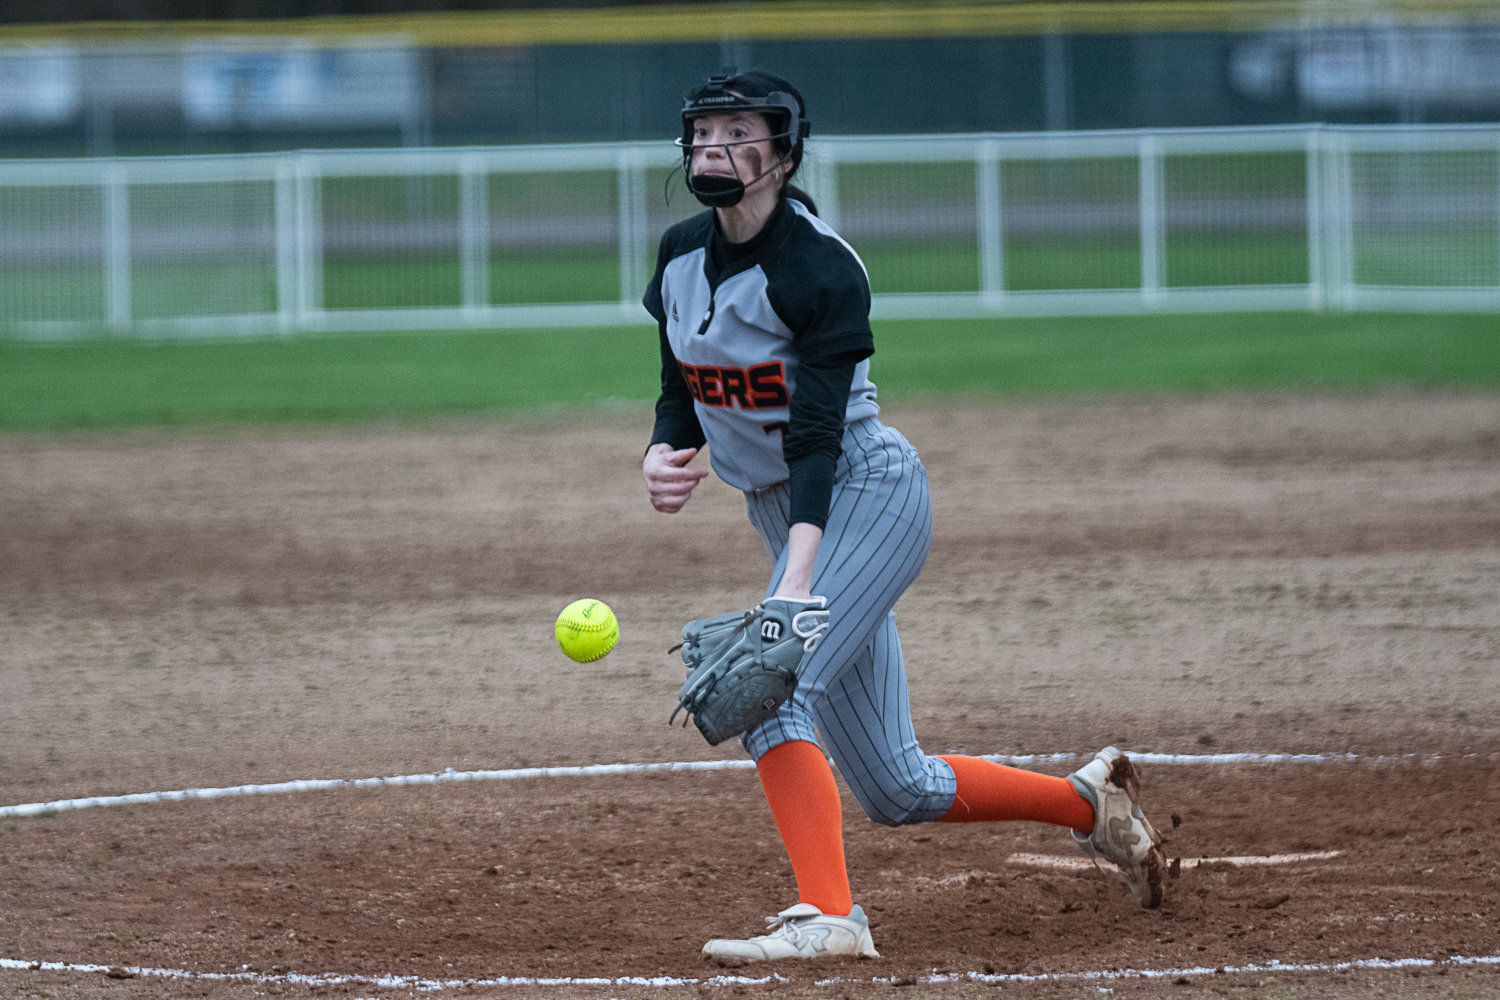 Peyton Smith throws a pitch during Centralia's 5-3 win over W.F. West on March 28.